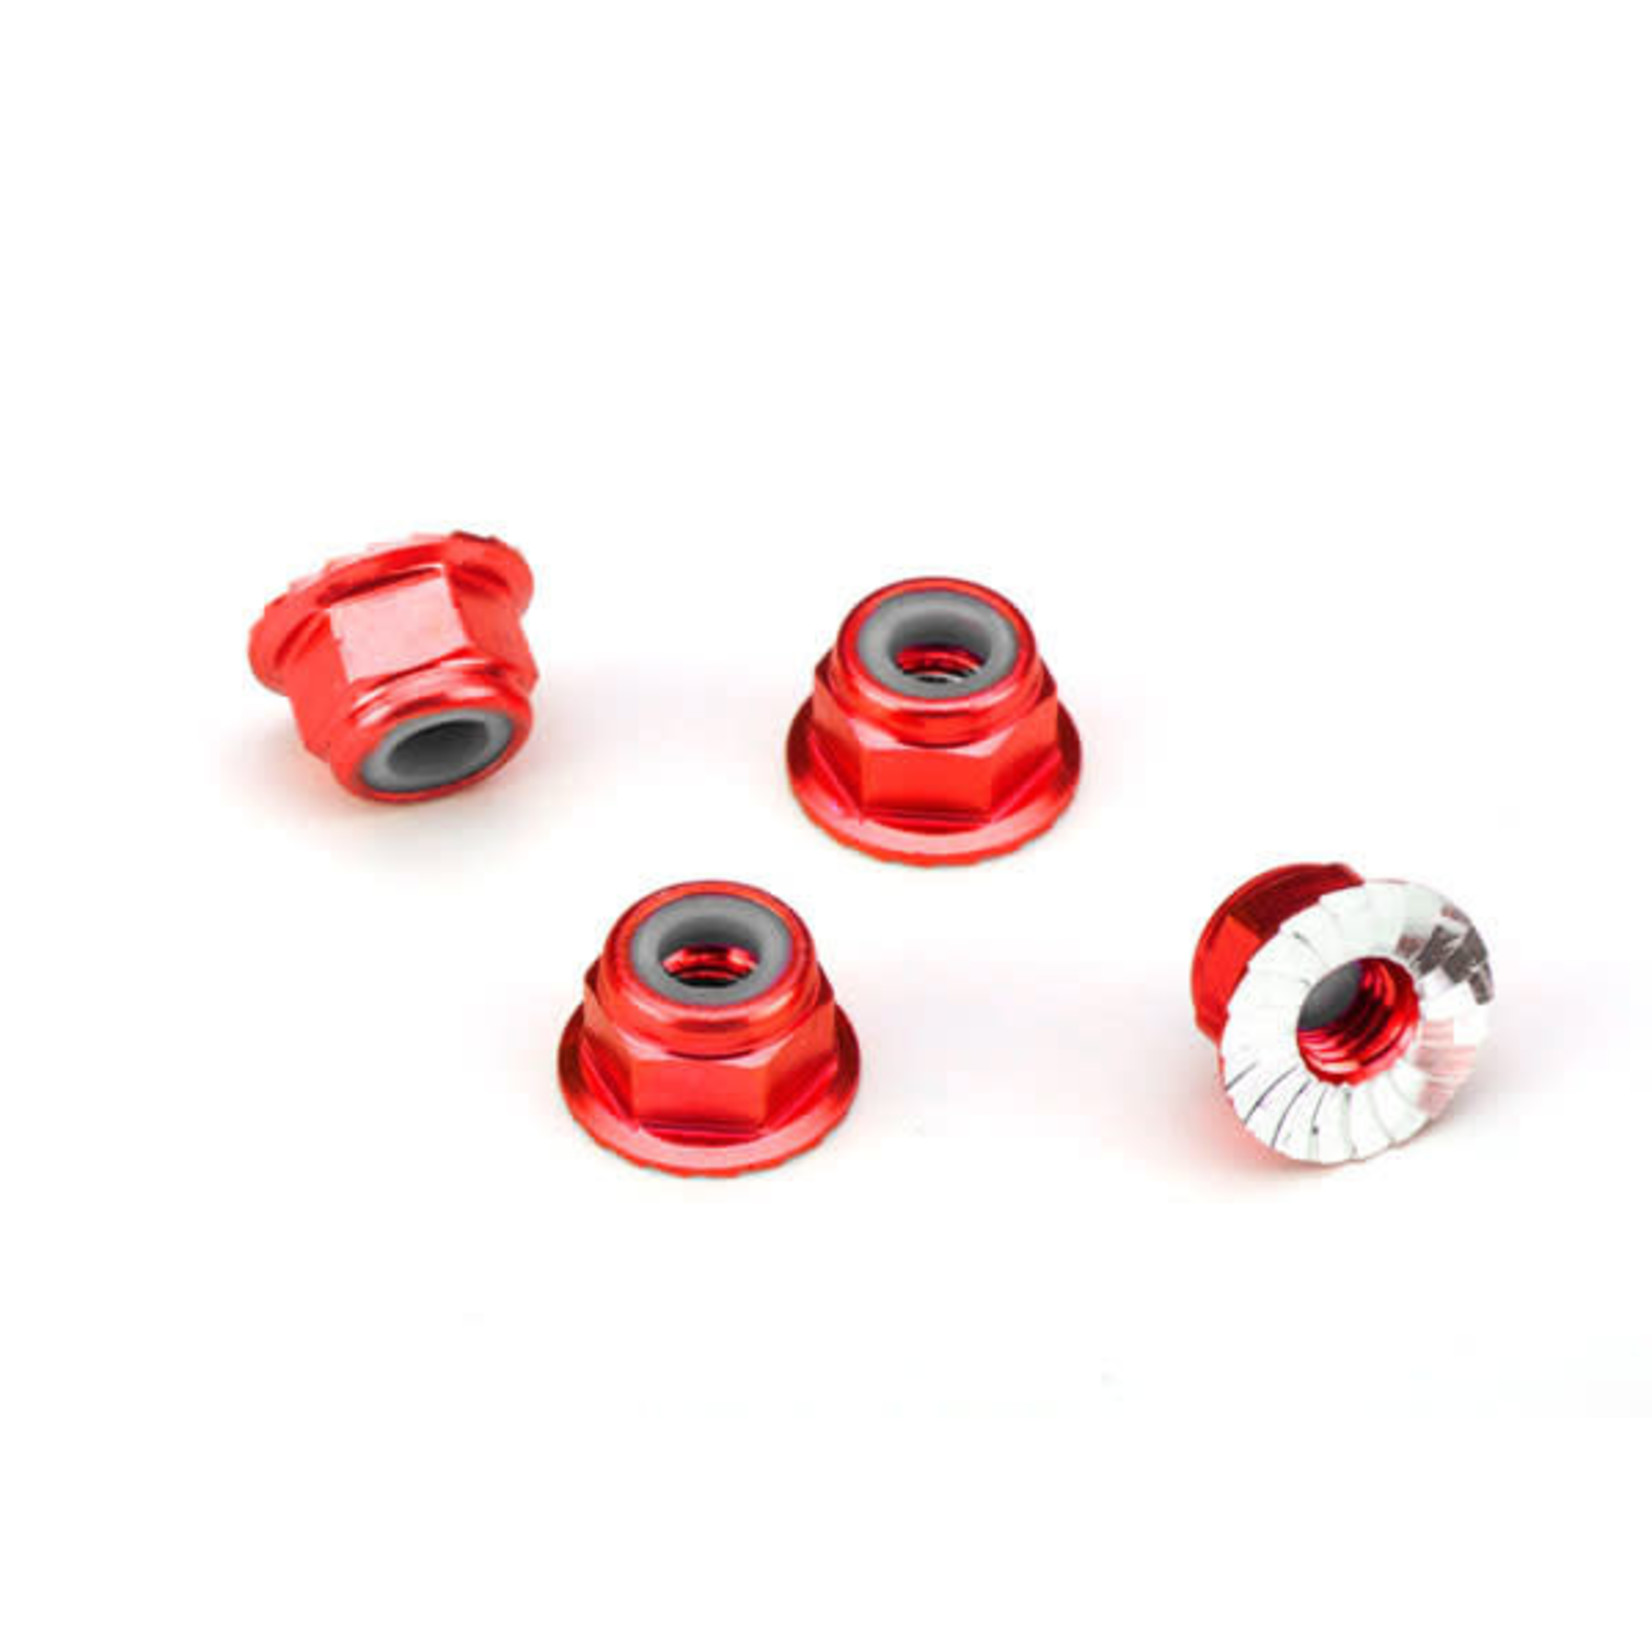 Traxxas Traxxas 4mm Aluminum Flanged Serrated Nuts (Red) (4) #1747A